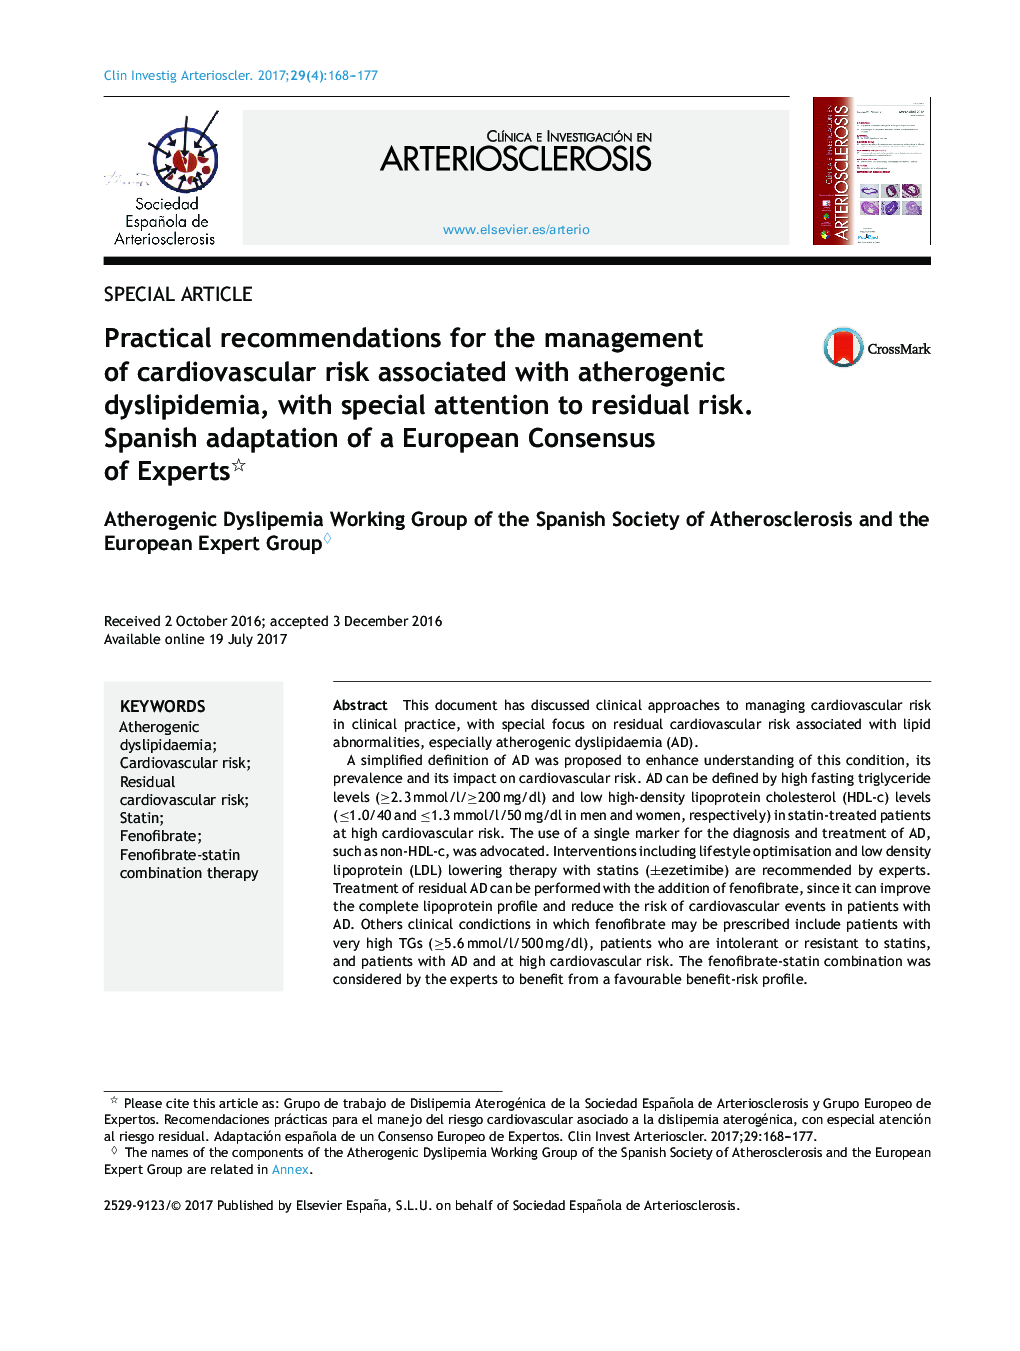 Practical recommendations for the management of cardiovascular risk associated with atherogenic dyslipidemia, with special attention to residual risk. Spanish adaptation of a European Consensus of Experts